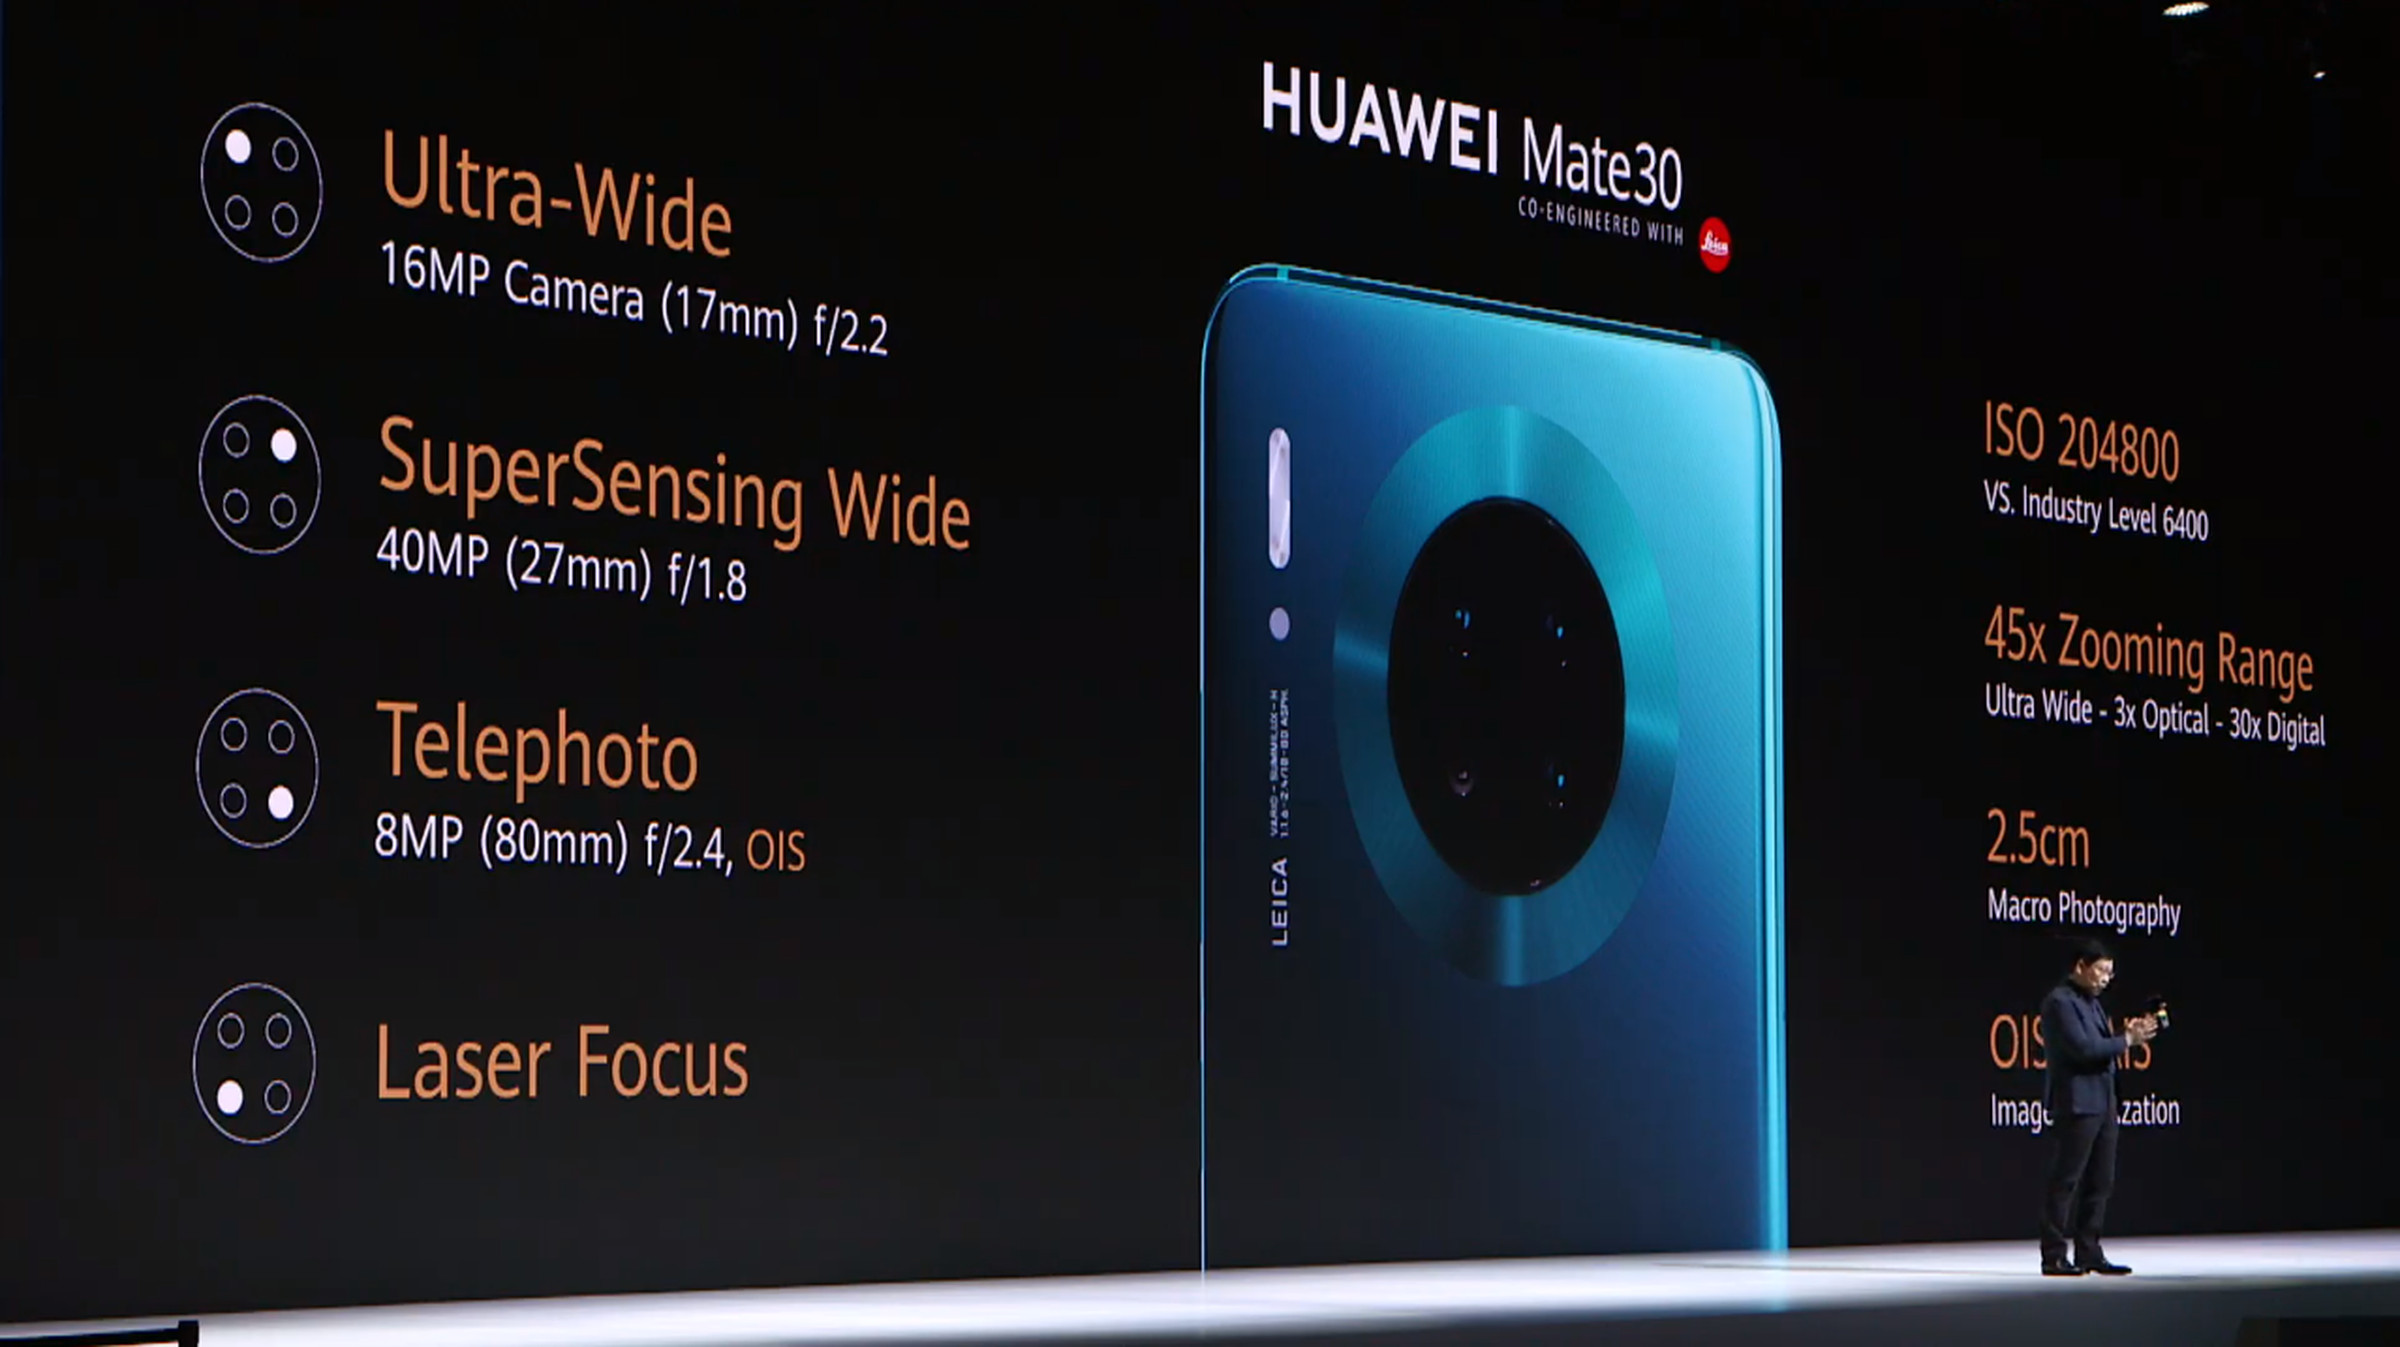 The Mate 30 has four sensors on its rear.